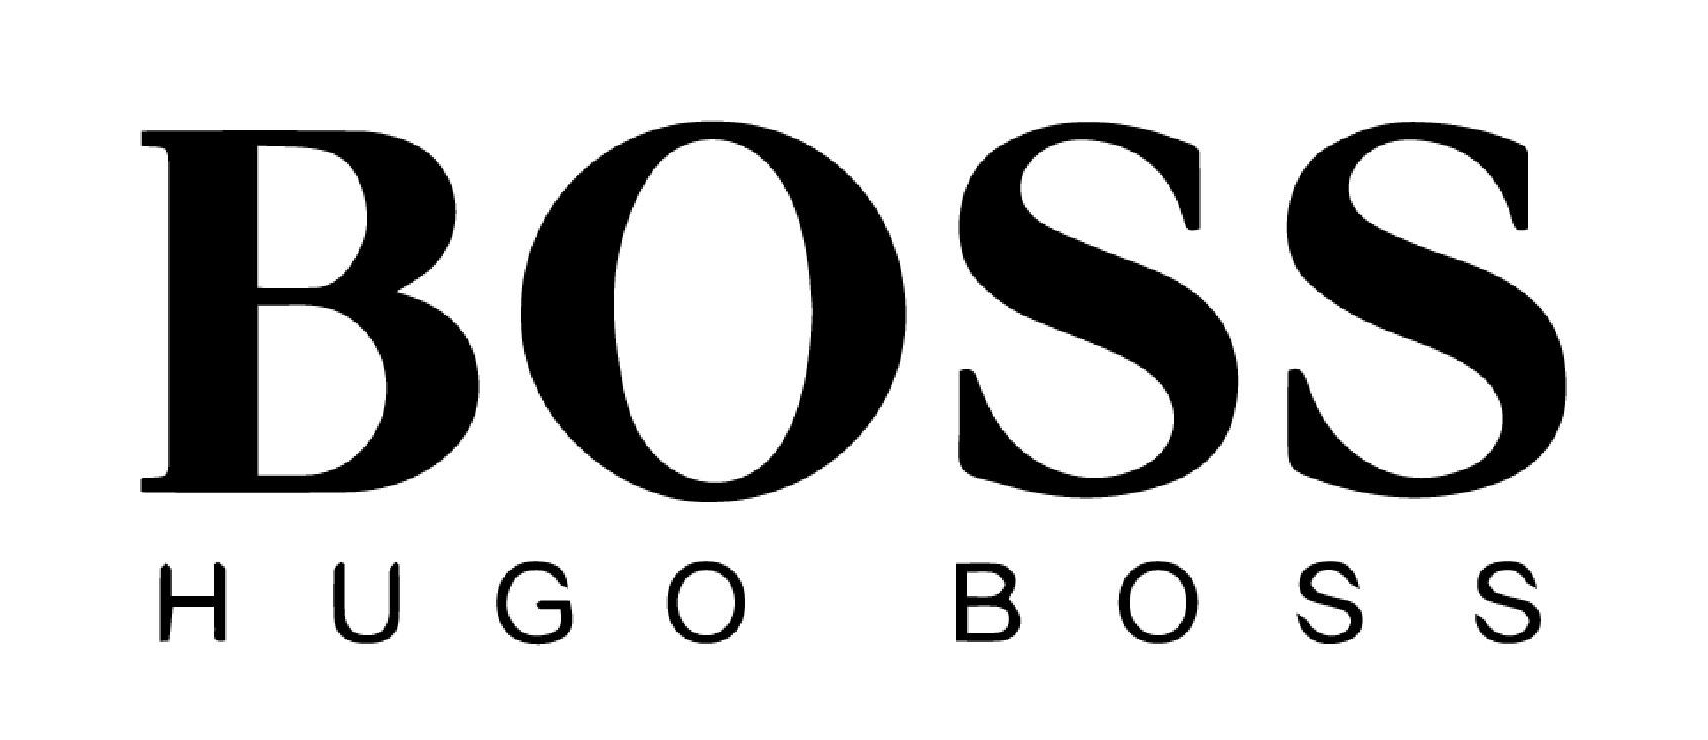 Buy Original Hugo boss Products At Best Price in Tanzania